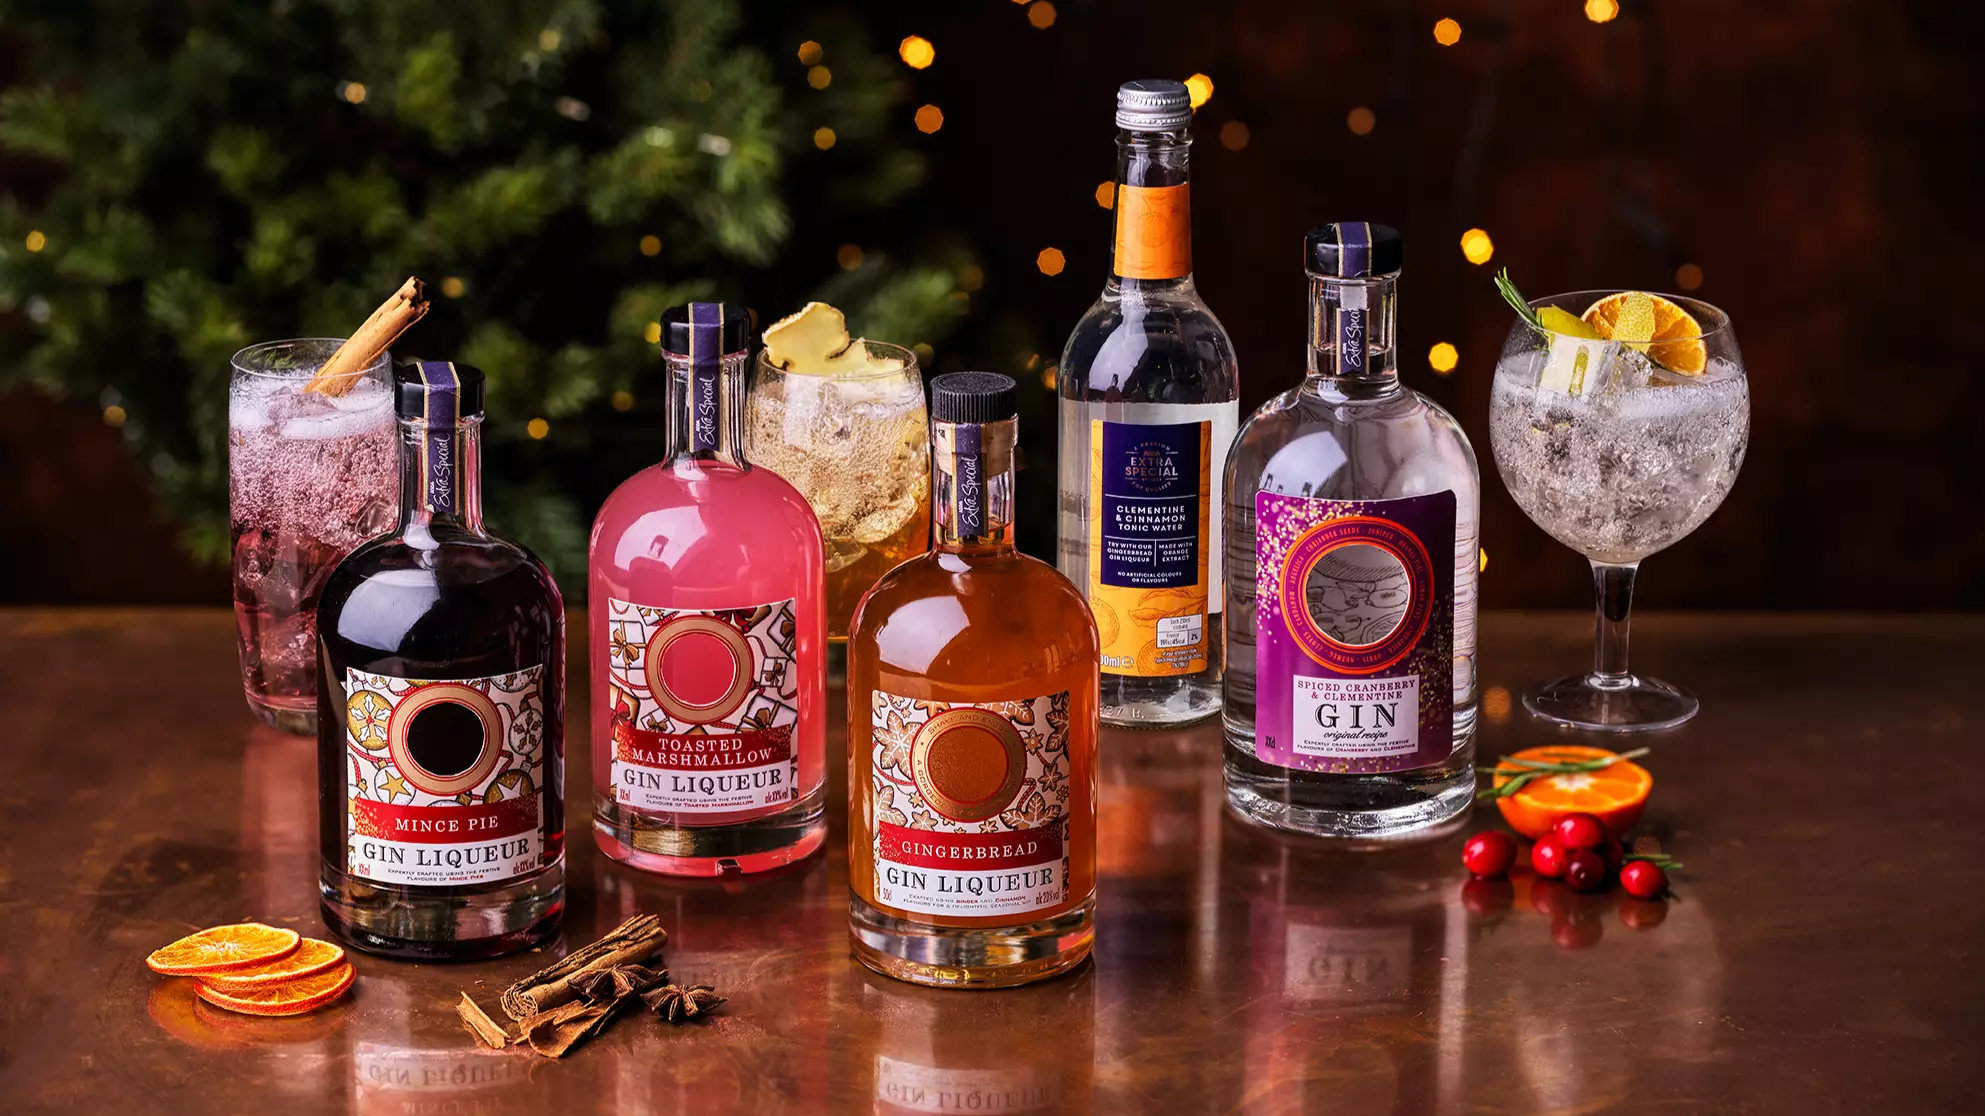 ​ASDA Reveals Its New Christmas Gin Range And We Want It All